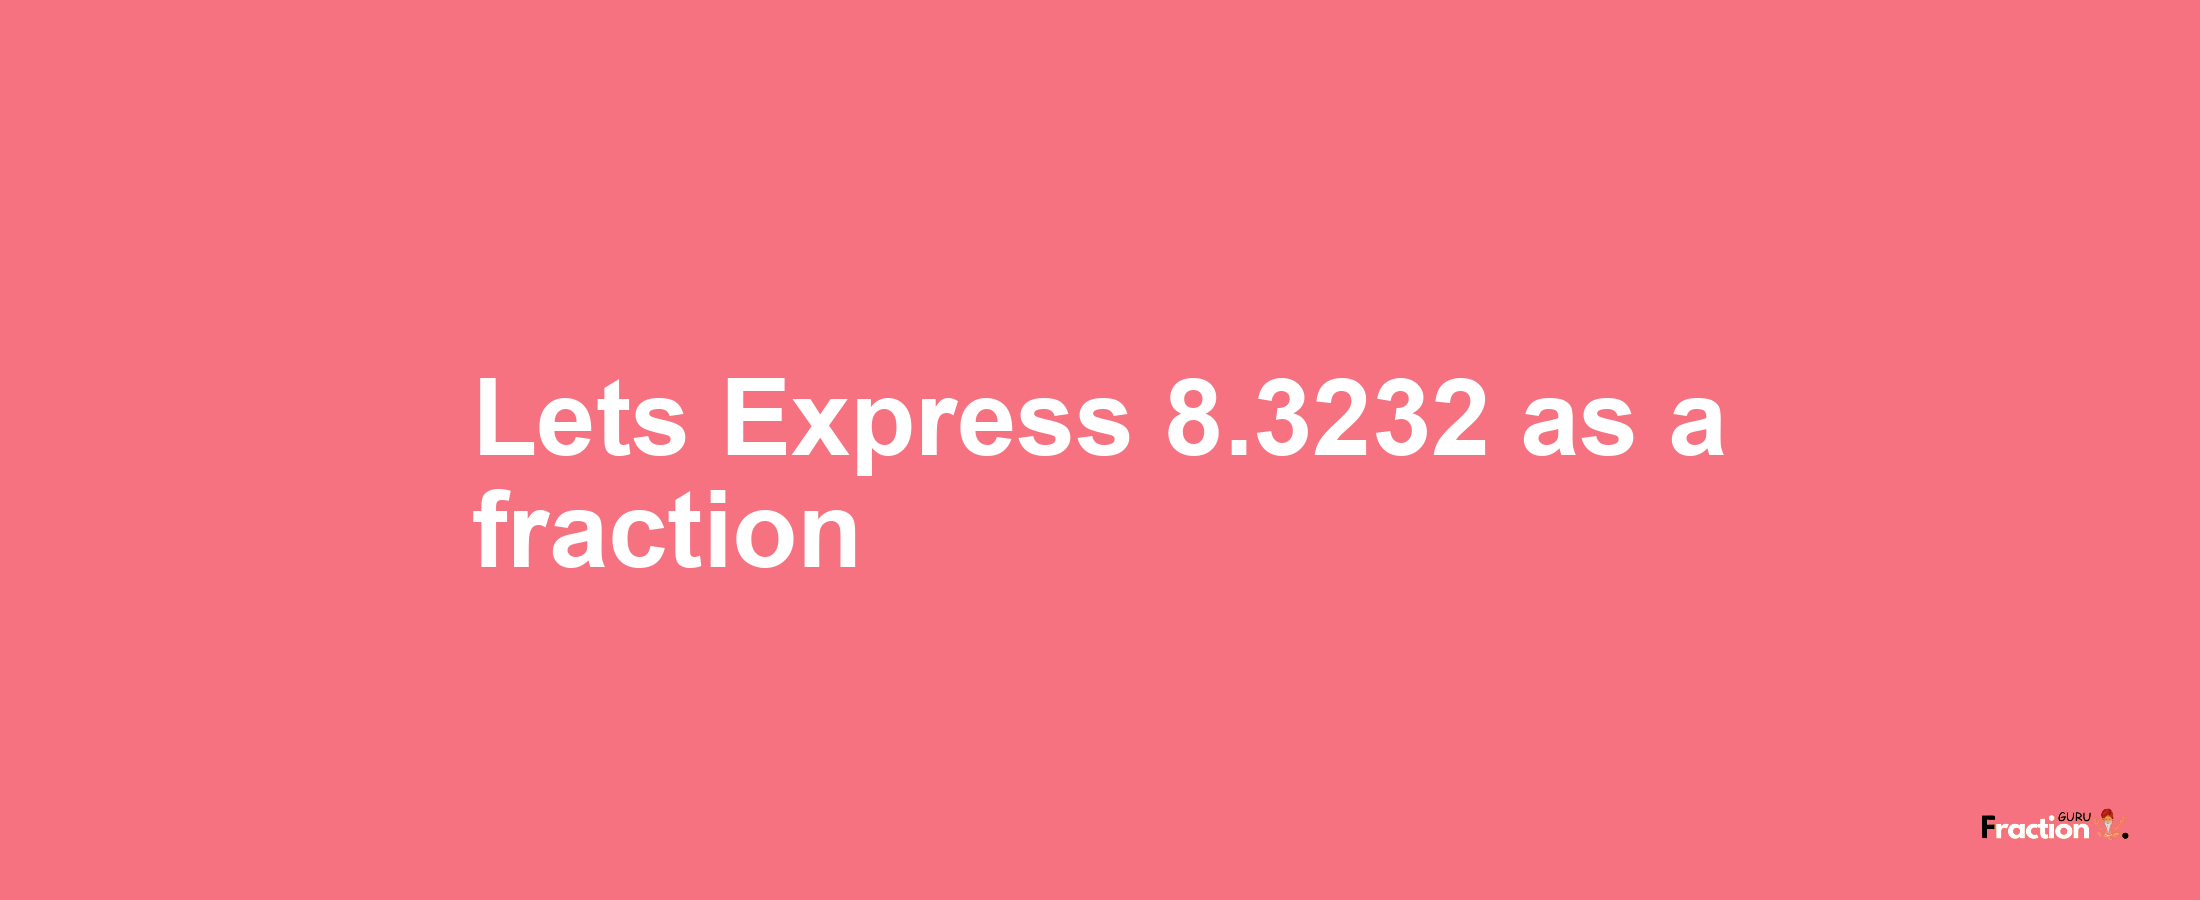 Lets Express 8.3232 as afraction